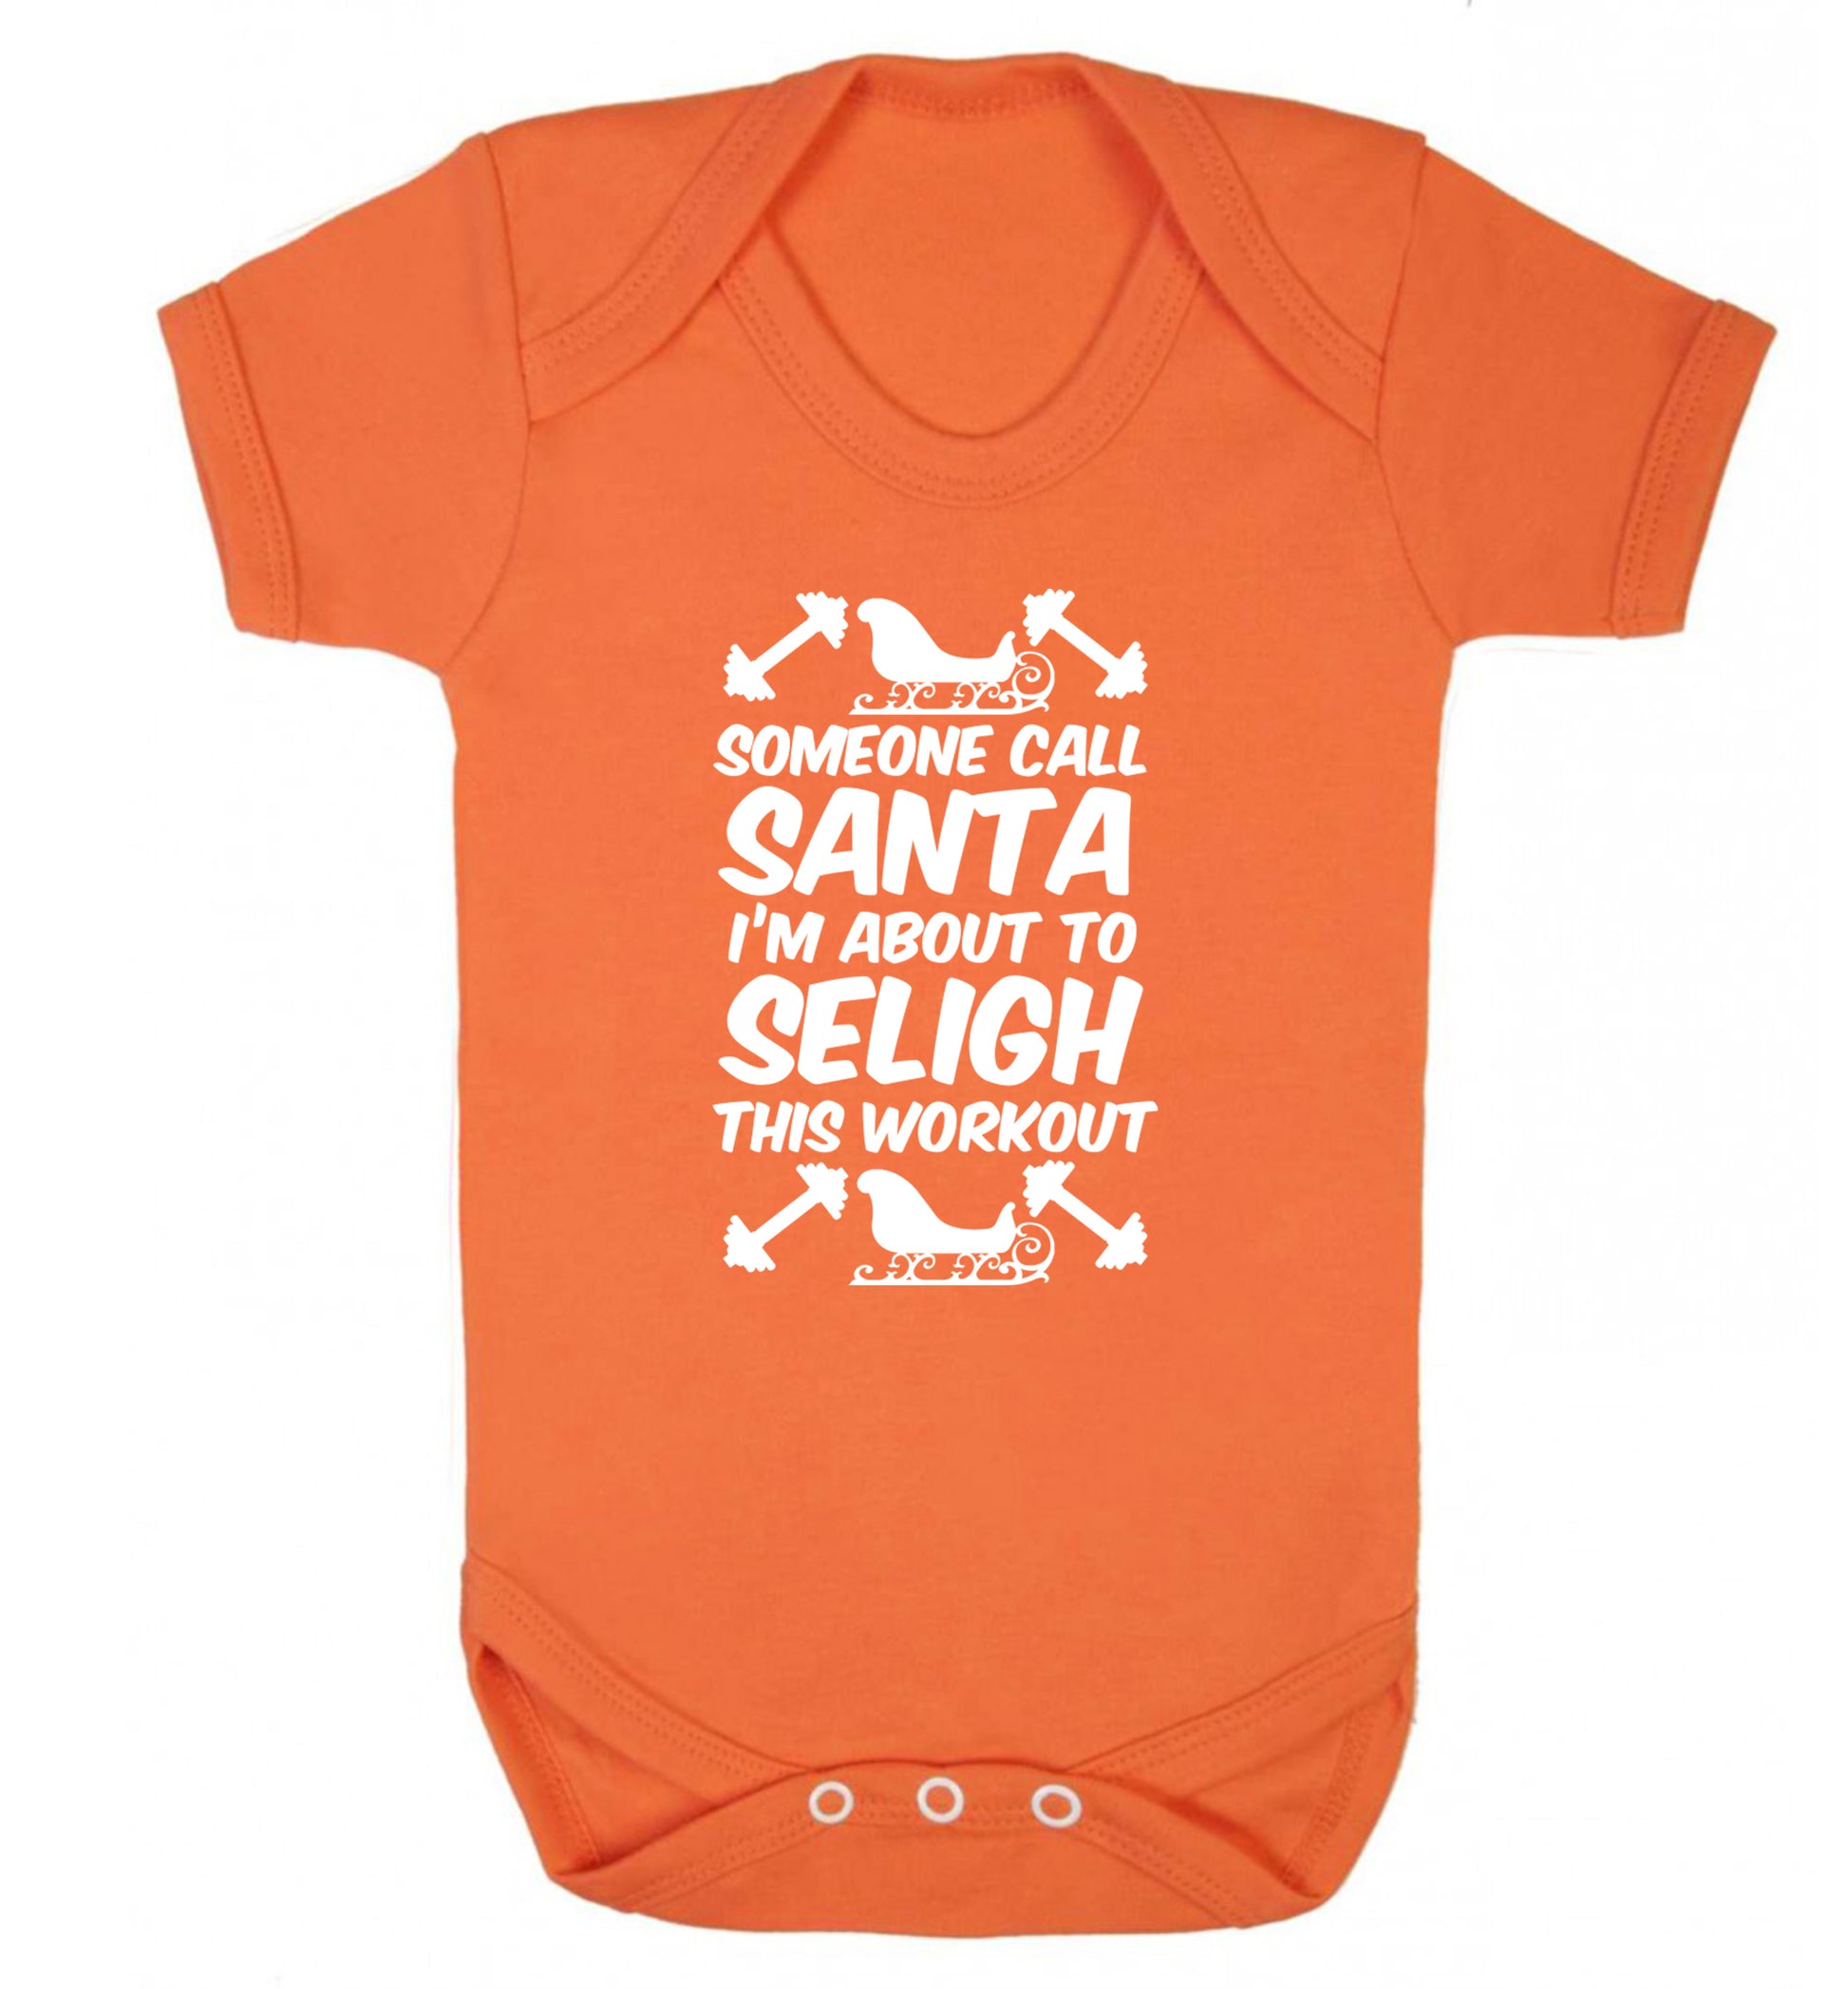 Someone call santa, I'm about to sleigh this workout Baby Vest orange 18-24 months